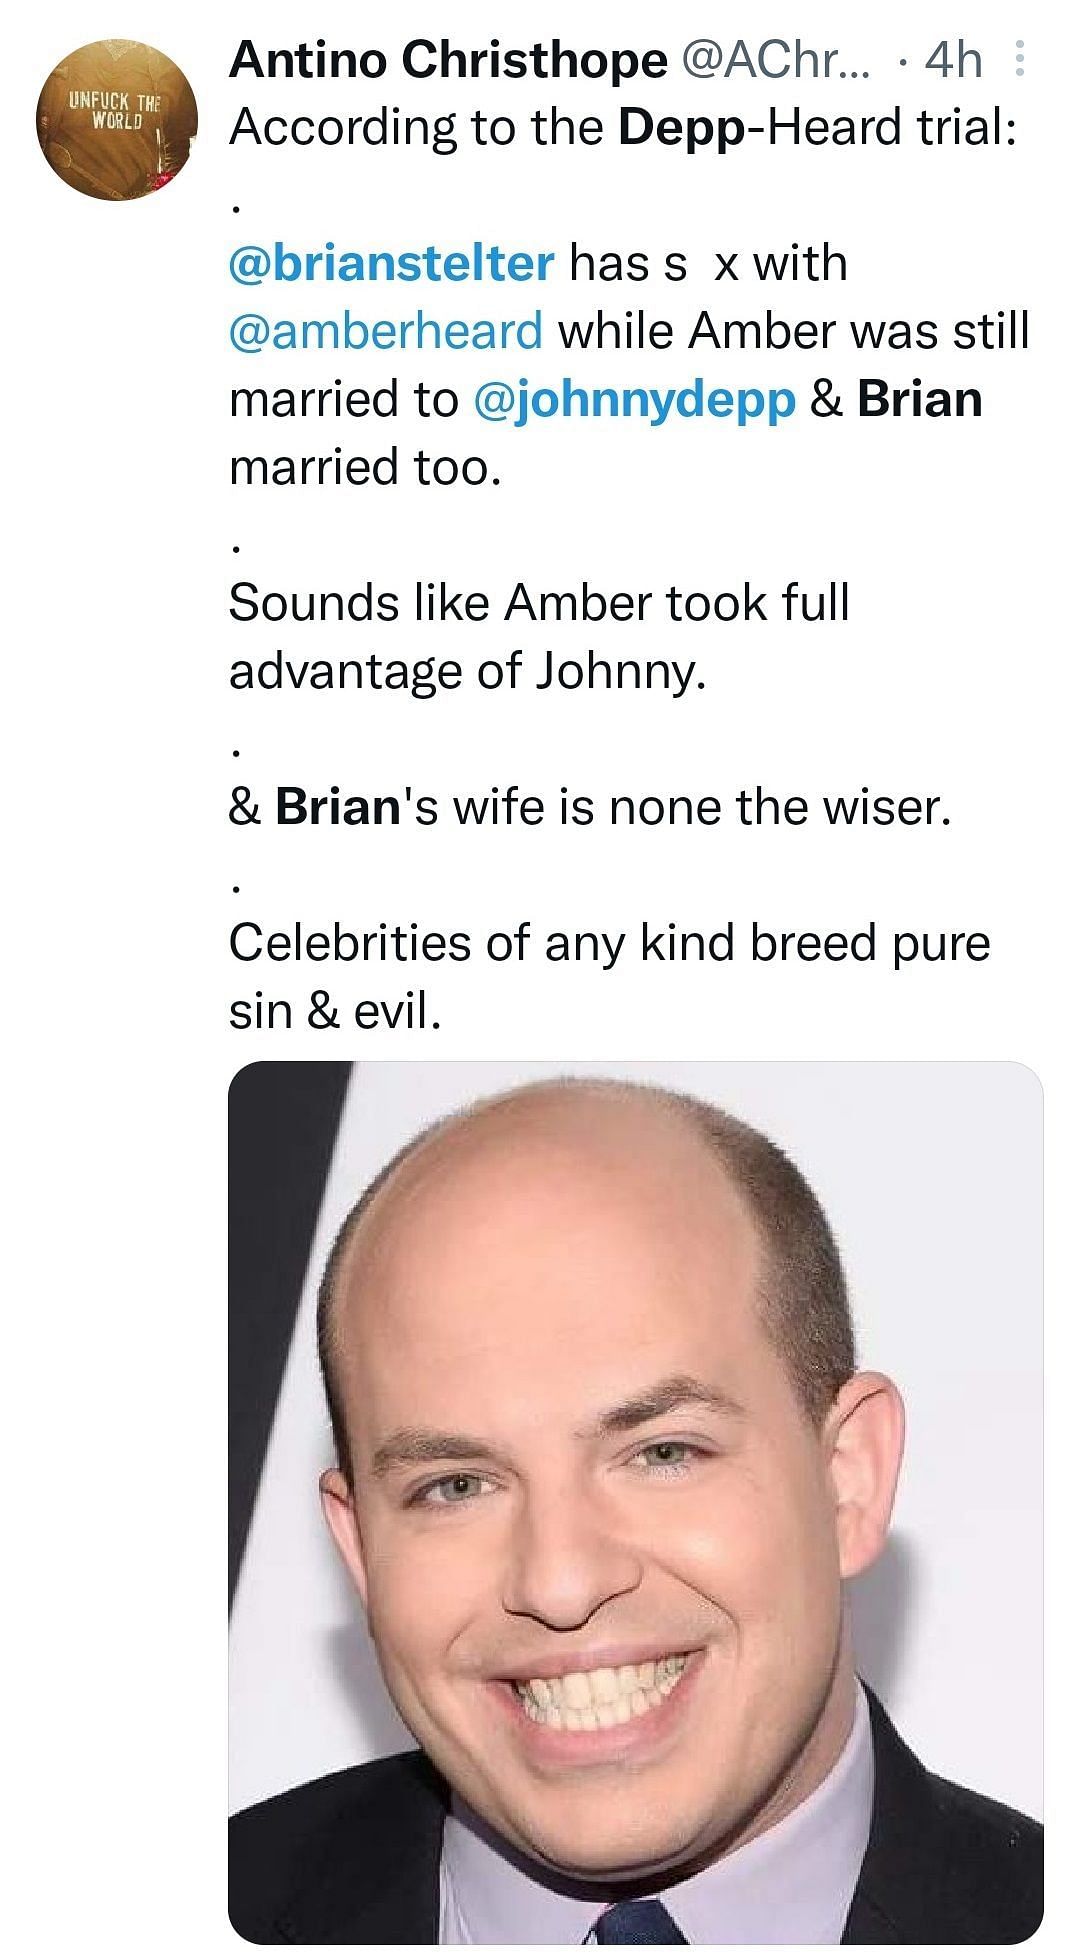 Allegations against Brian Stelter (Image via AChristhope/Twitter)